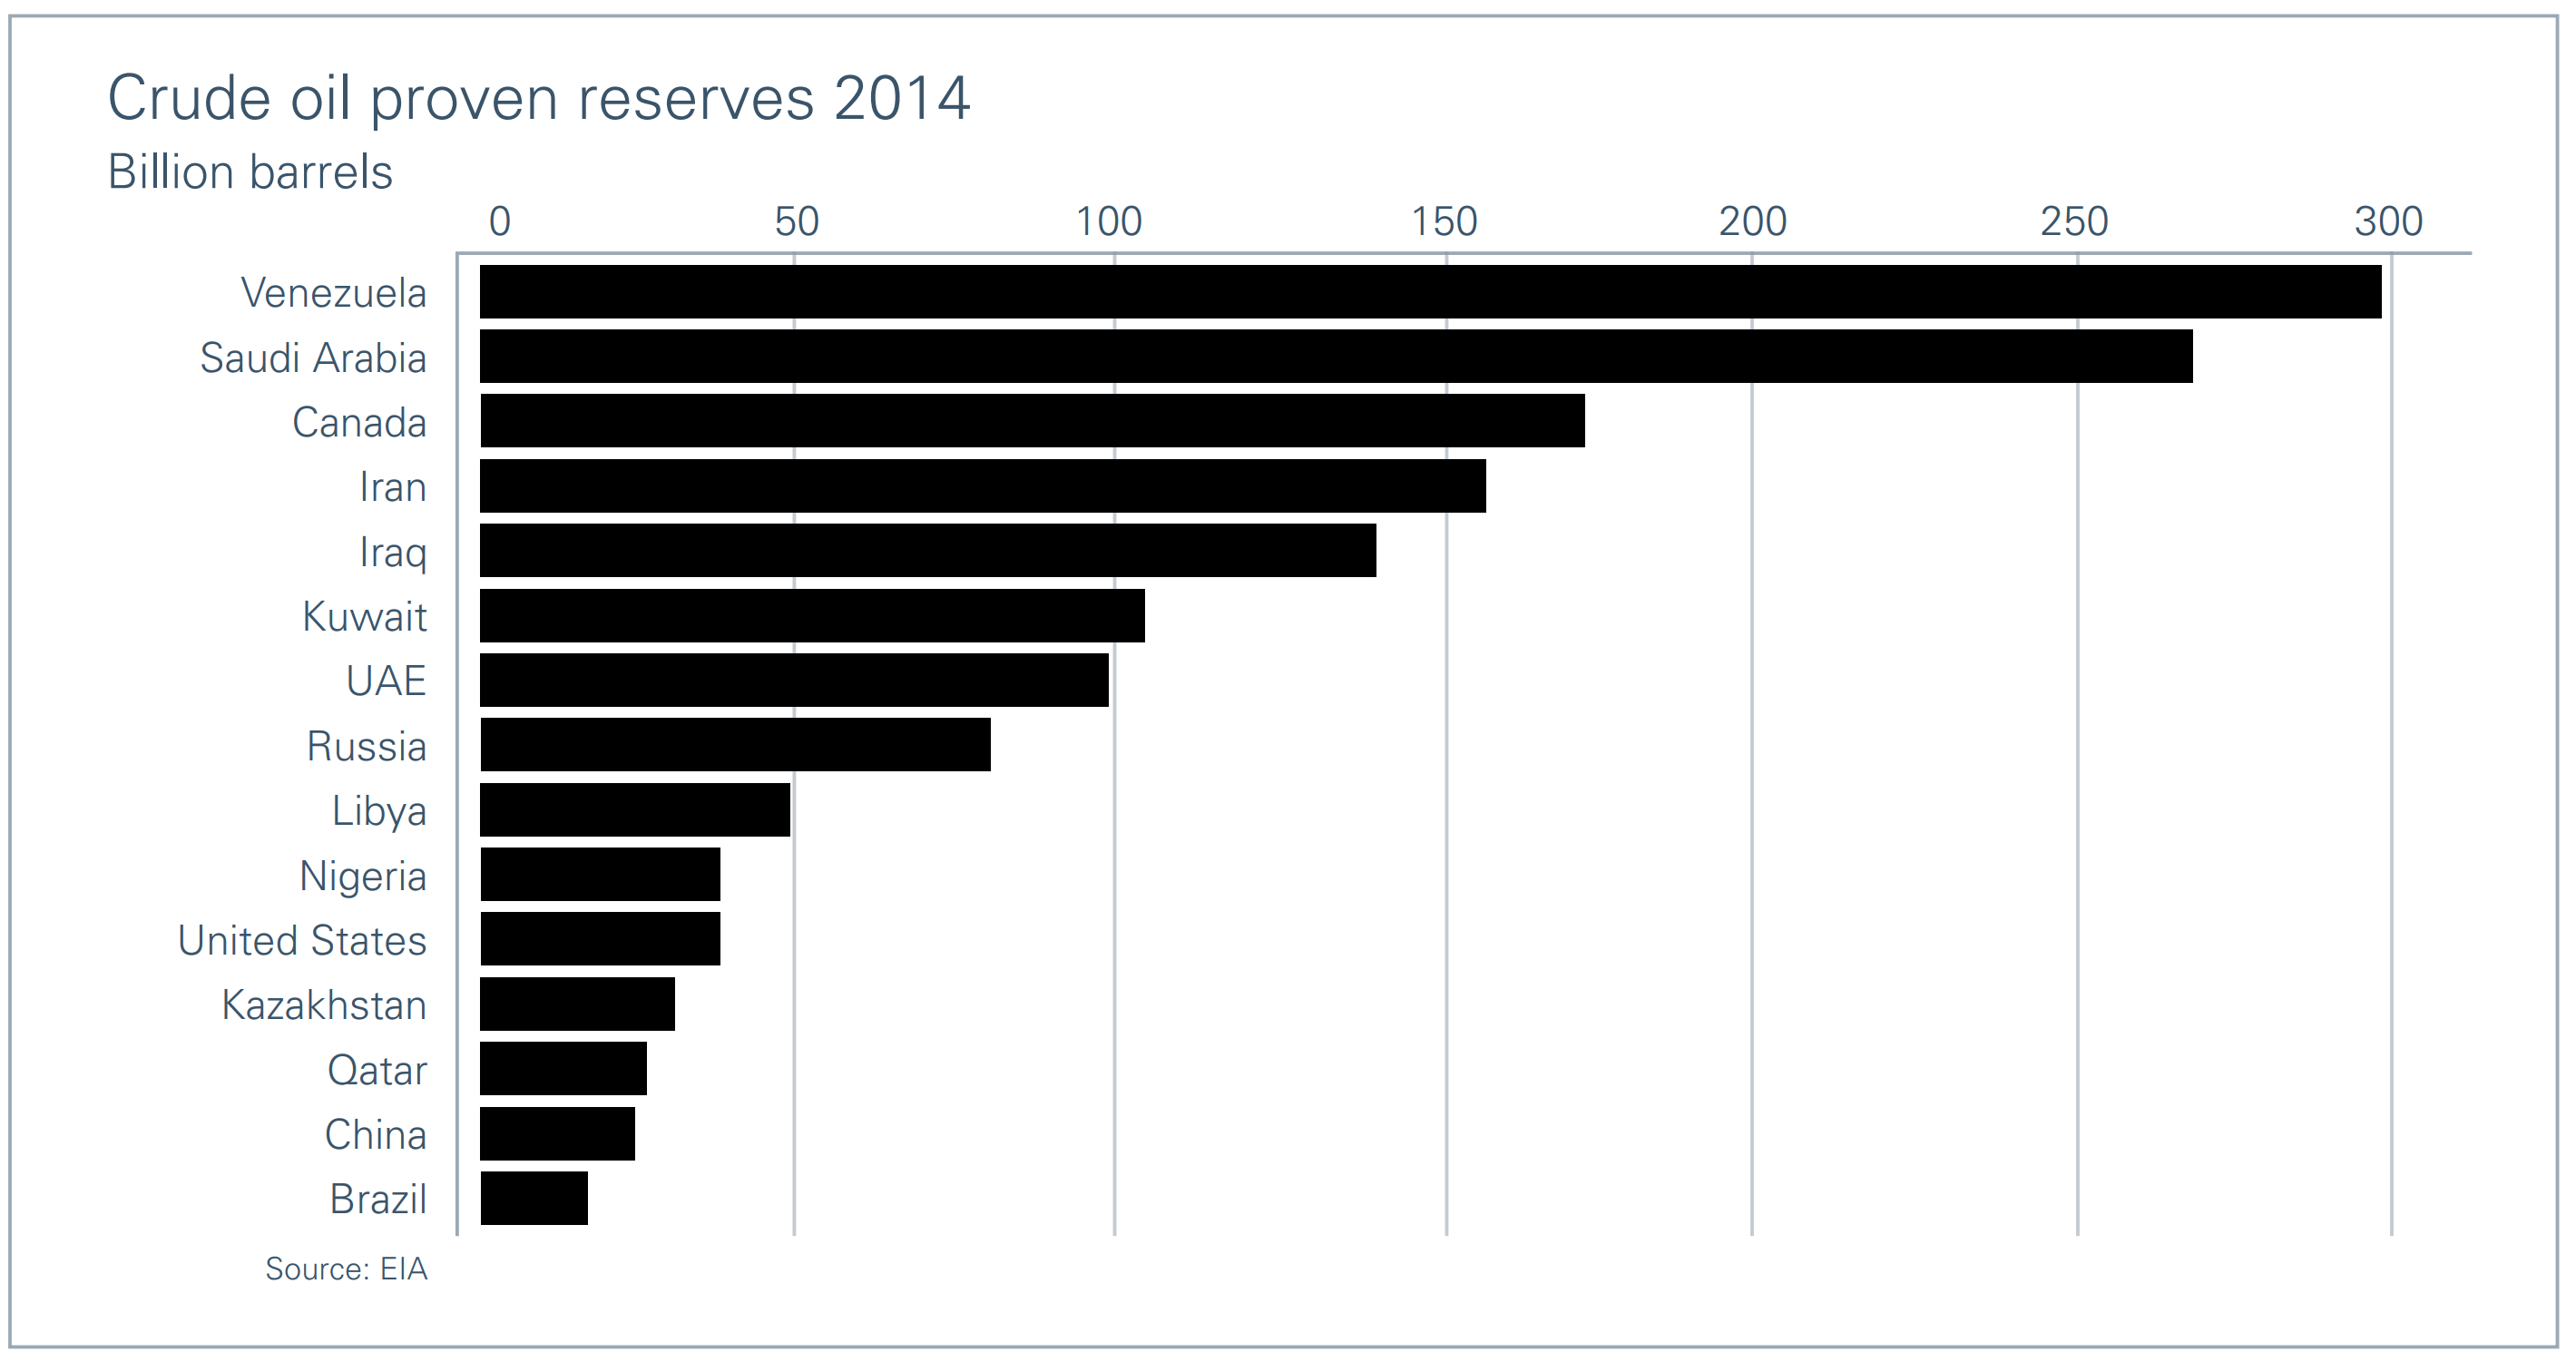 Crude oil proven reserves 2014